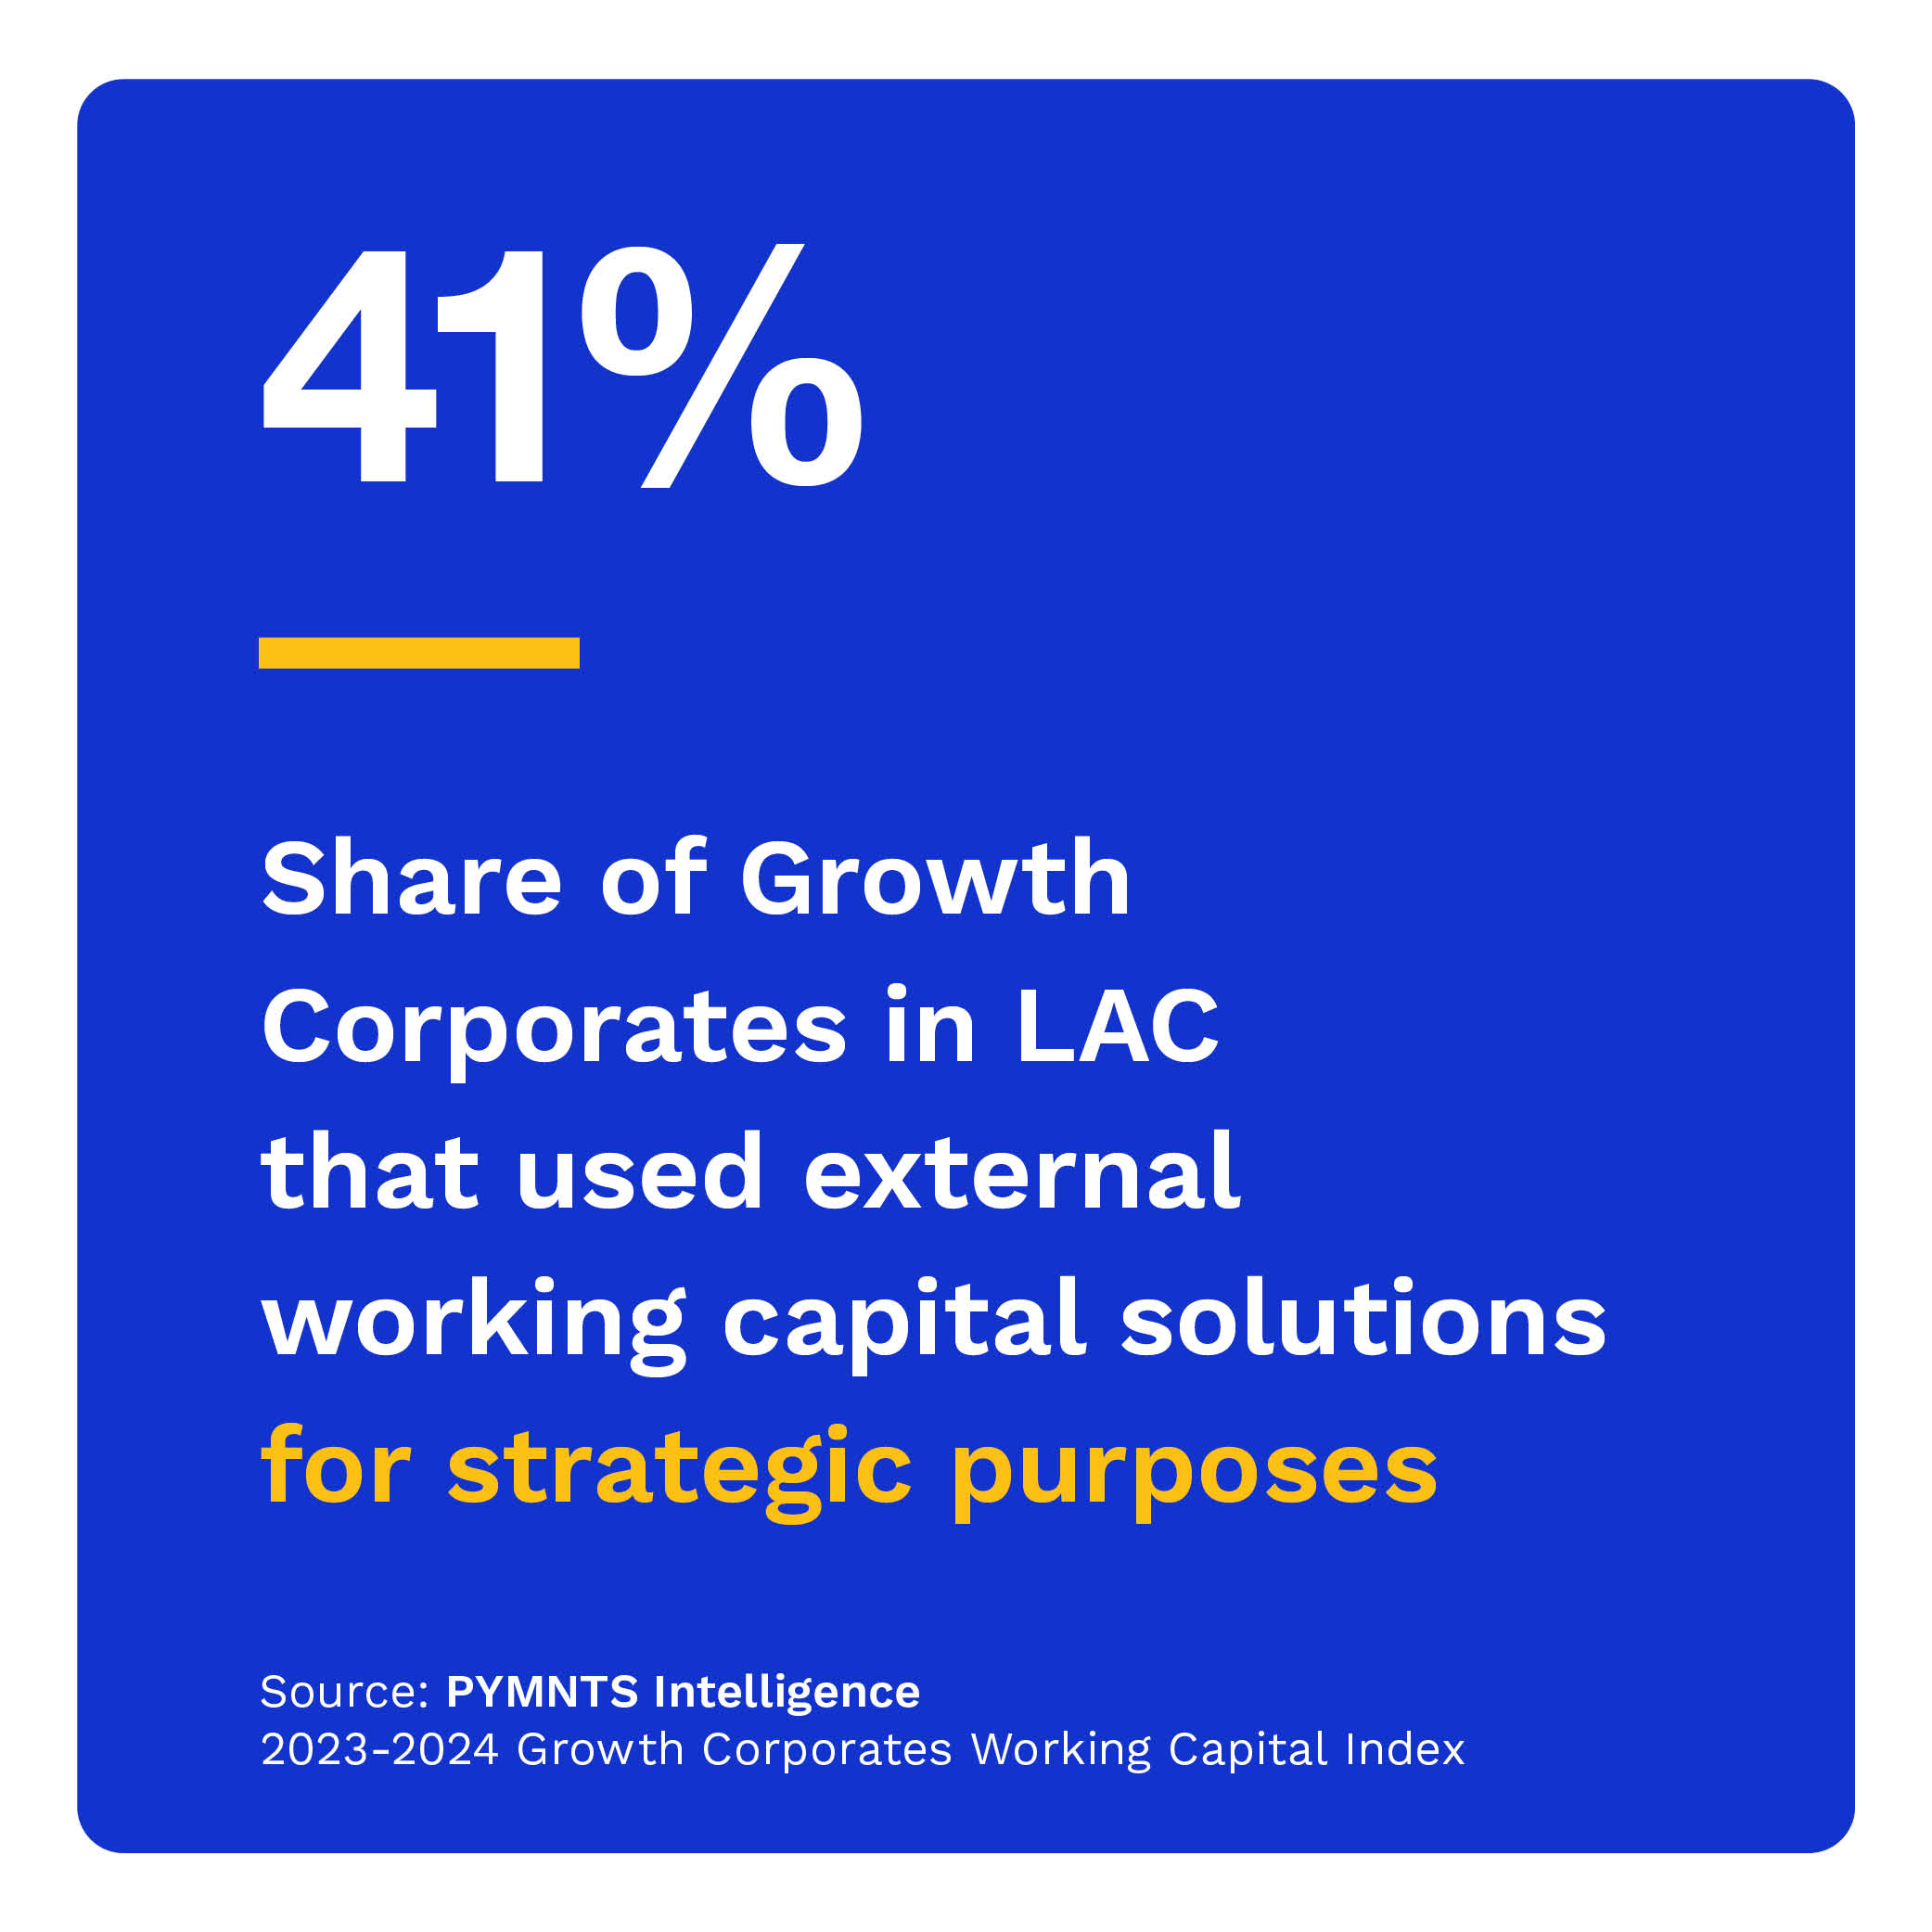 41%: Share of Growth Corporates in LAC that used external working capital solutions for strategic purposes